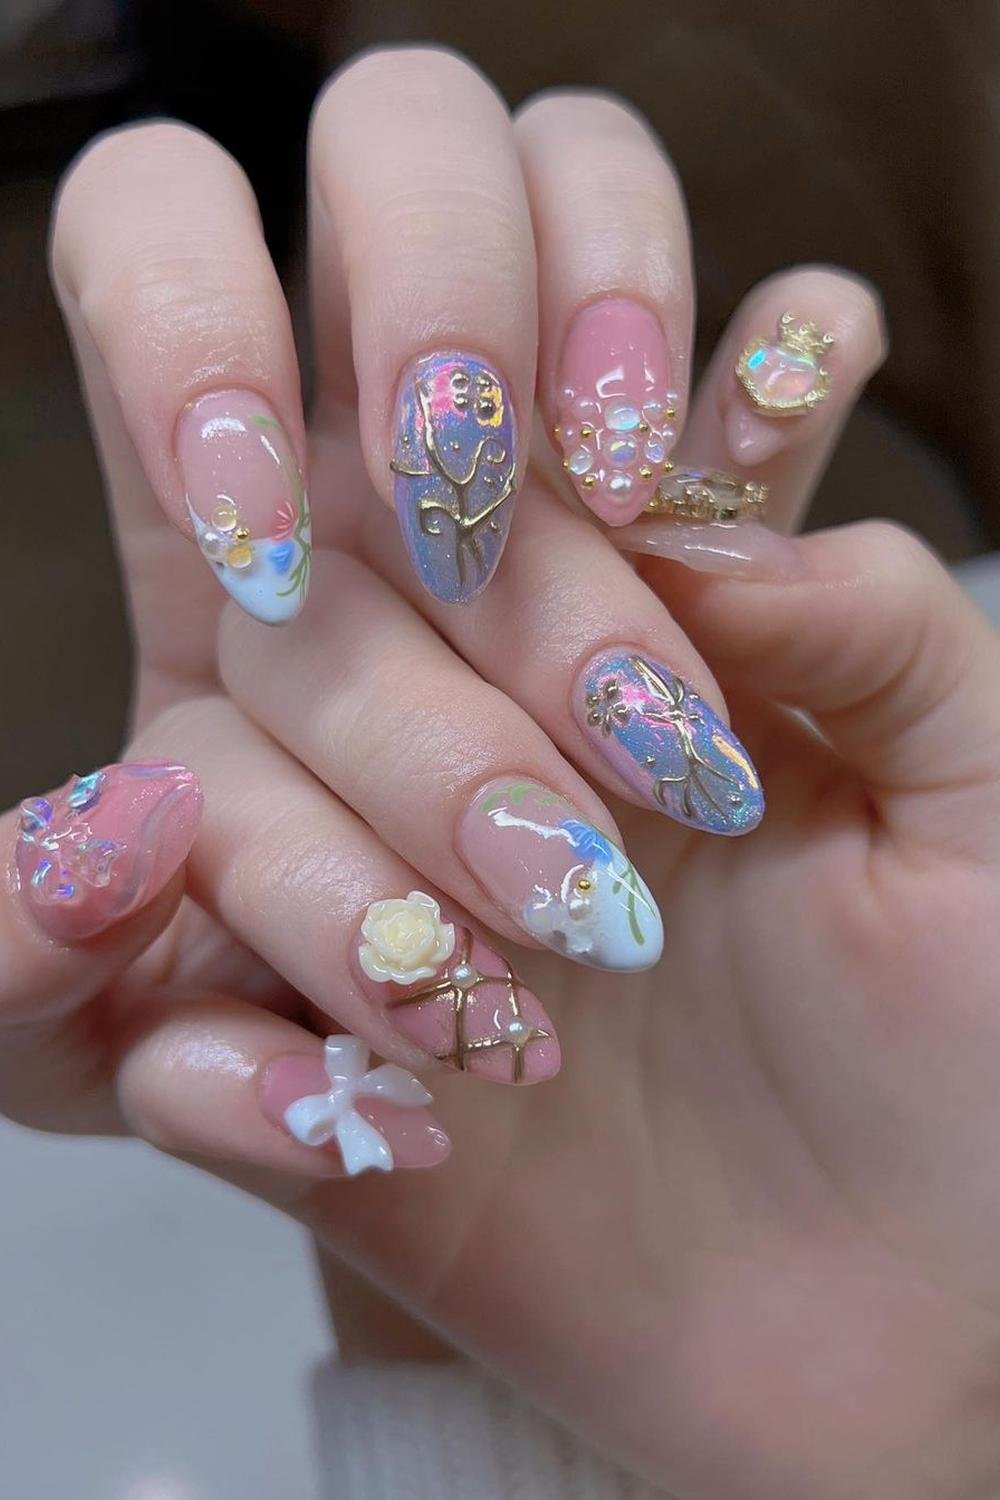 4 - Picture of Whimsical Nails